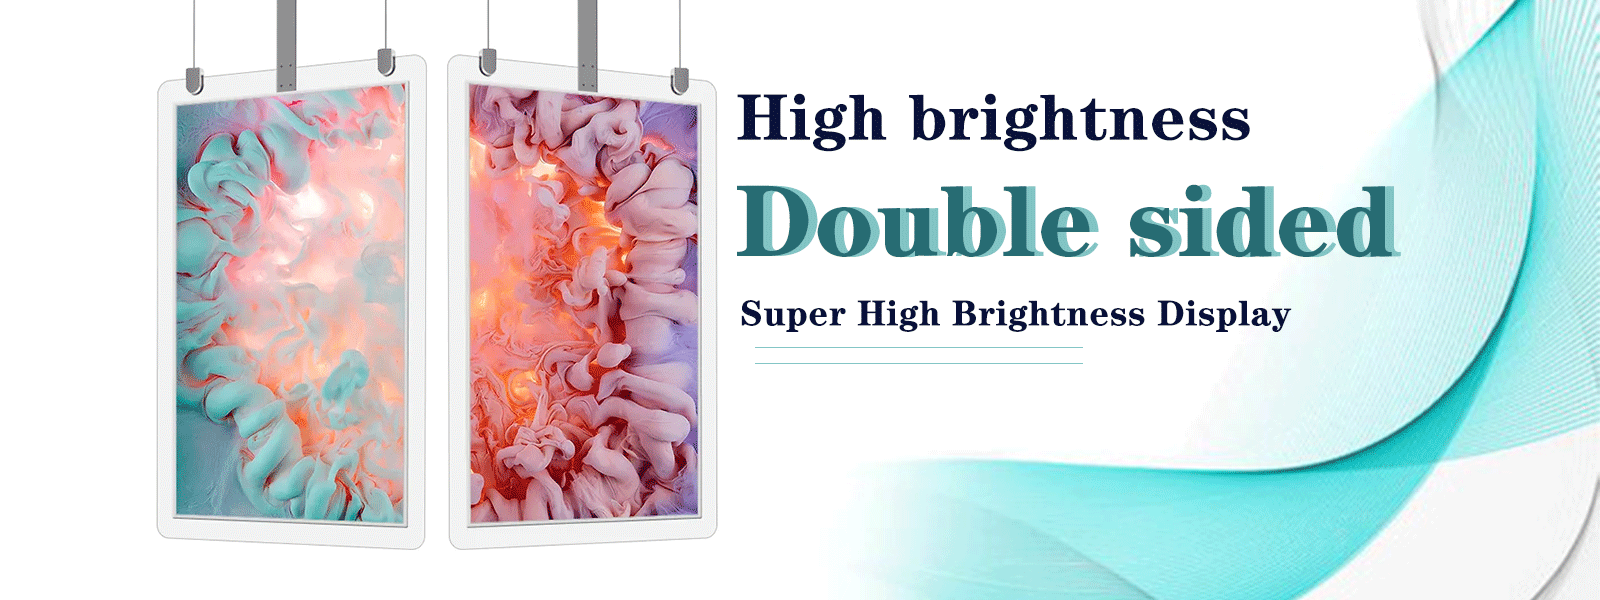 Double sided Super High Brightness Display